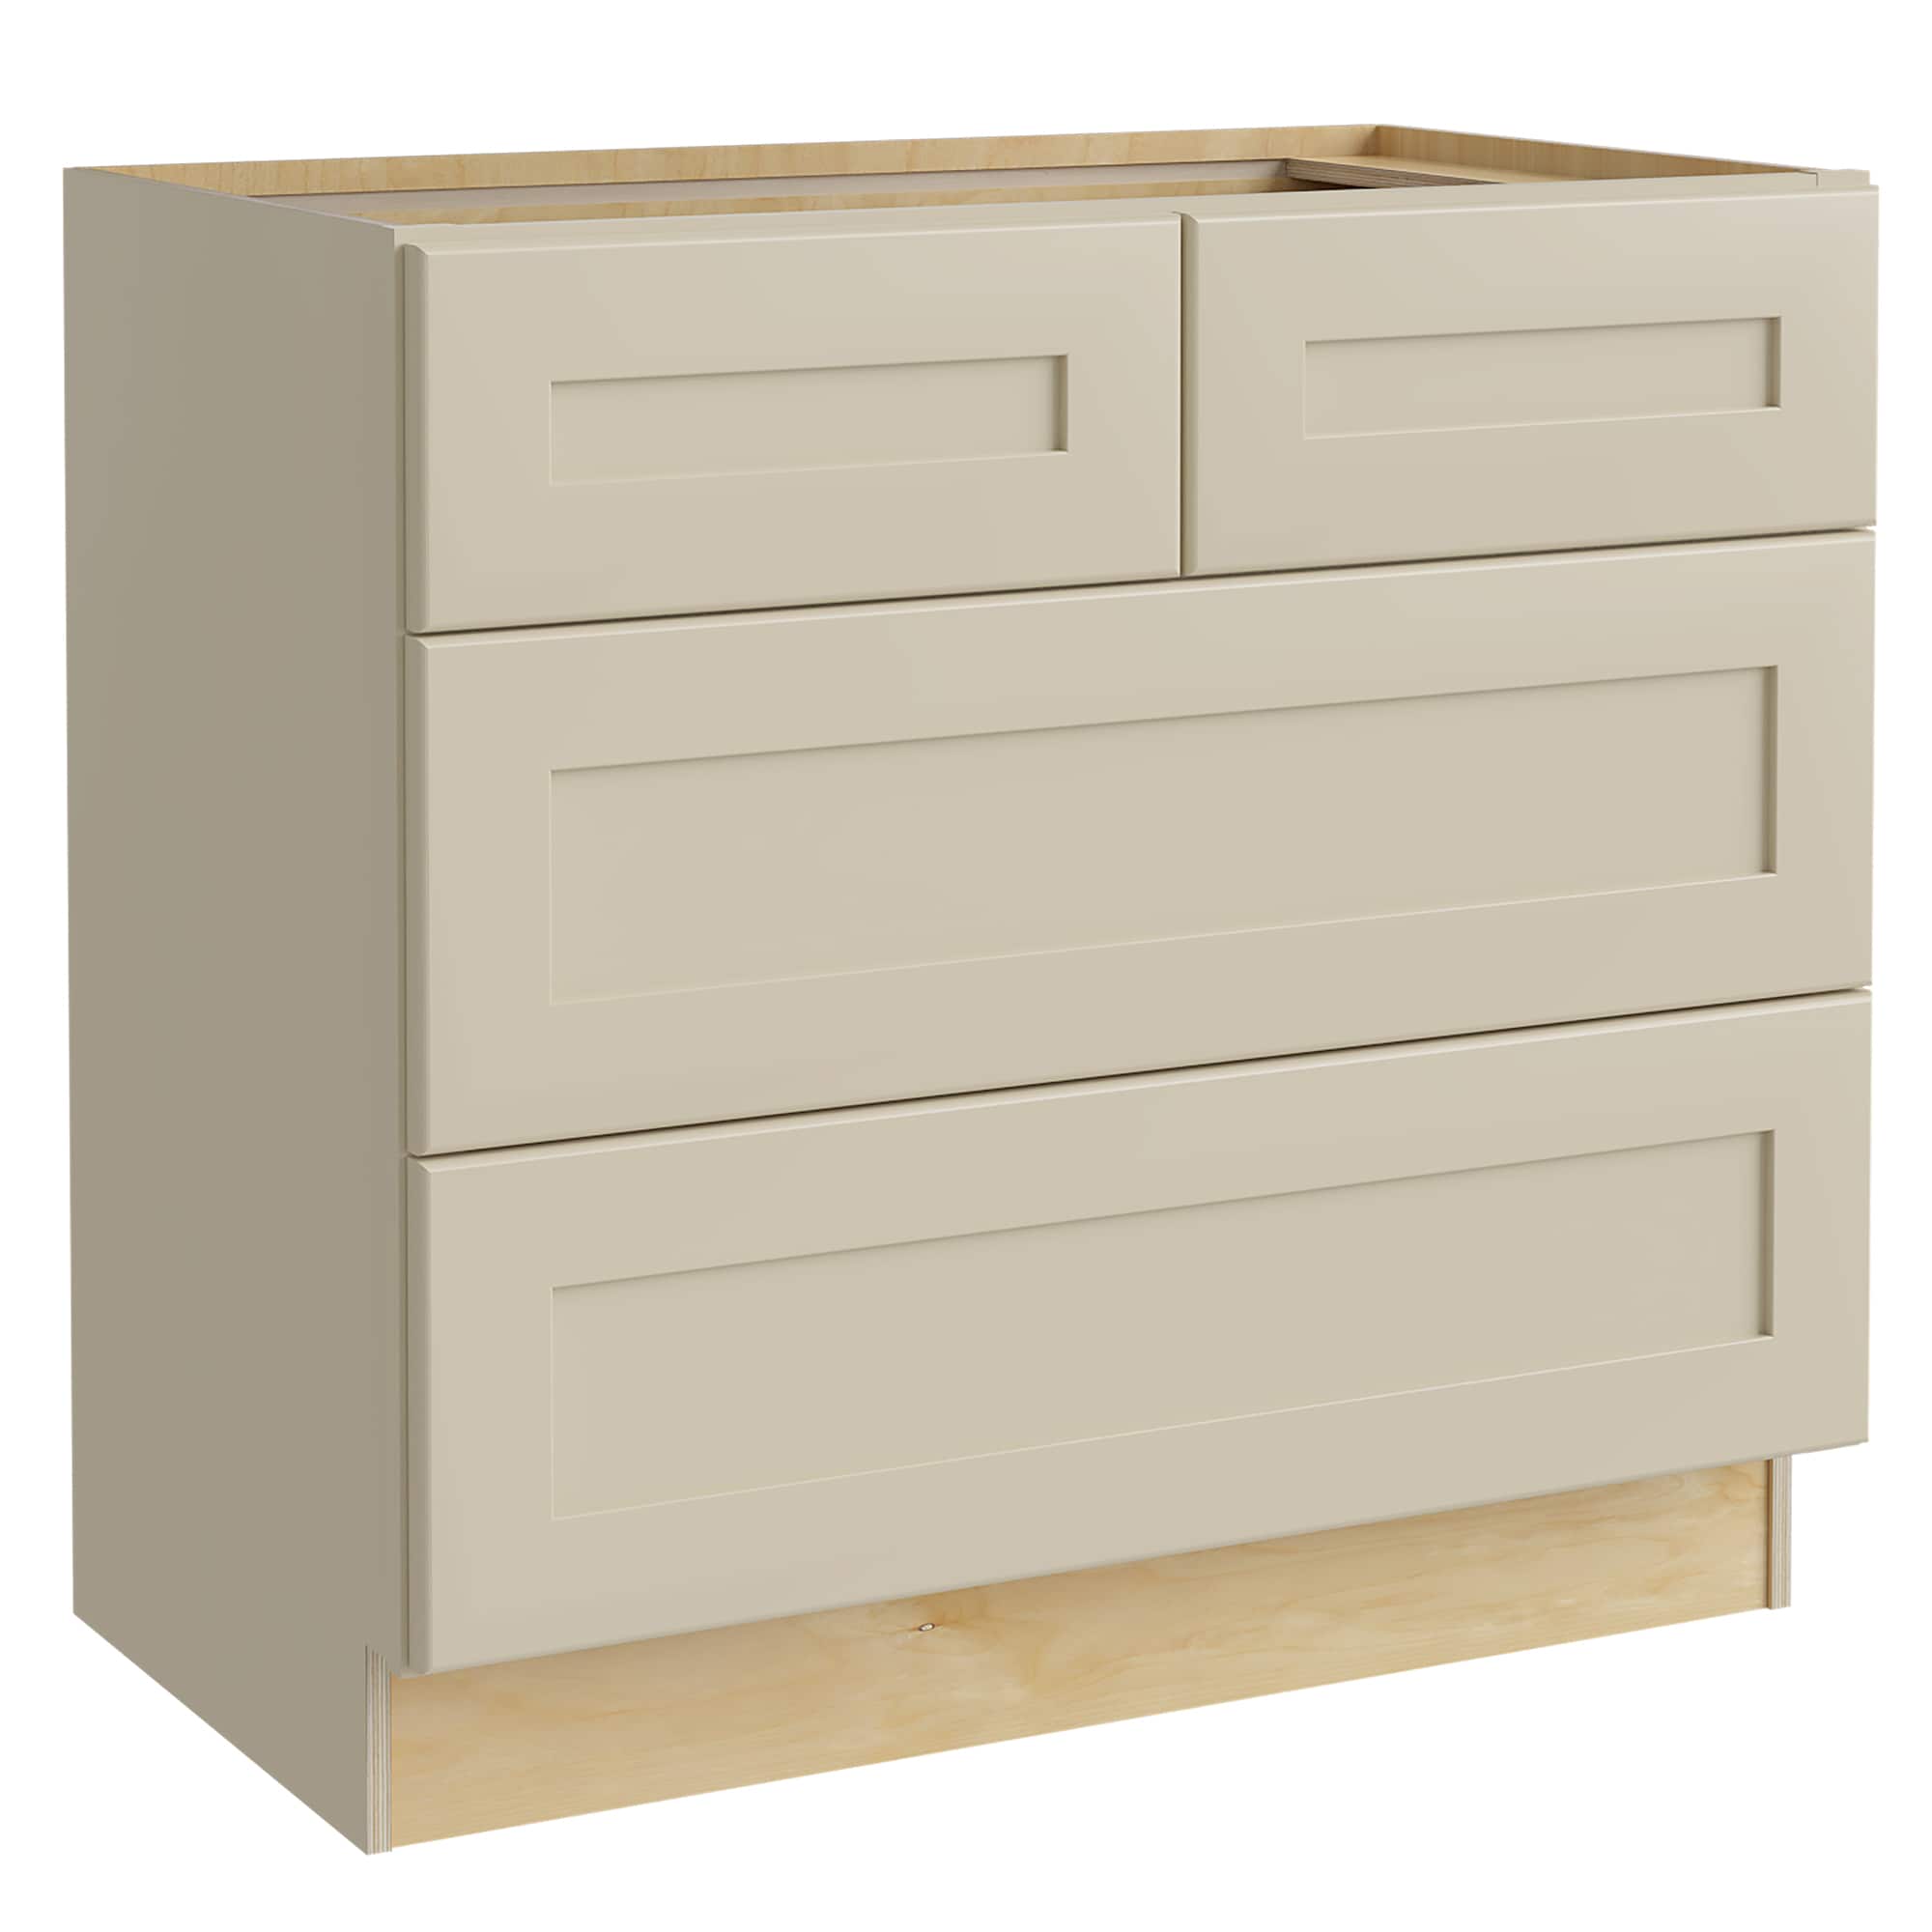 Luxxe Cabinetry 36-in W x 34.5-in H x 24-in D Norfolk Blended Cream Painted Drawer Base Fully Assembled Semi-custom Cabinet in Off-White | BD36-NBC